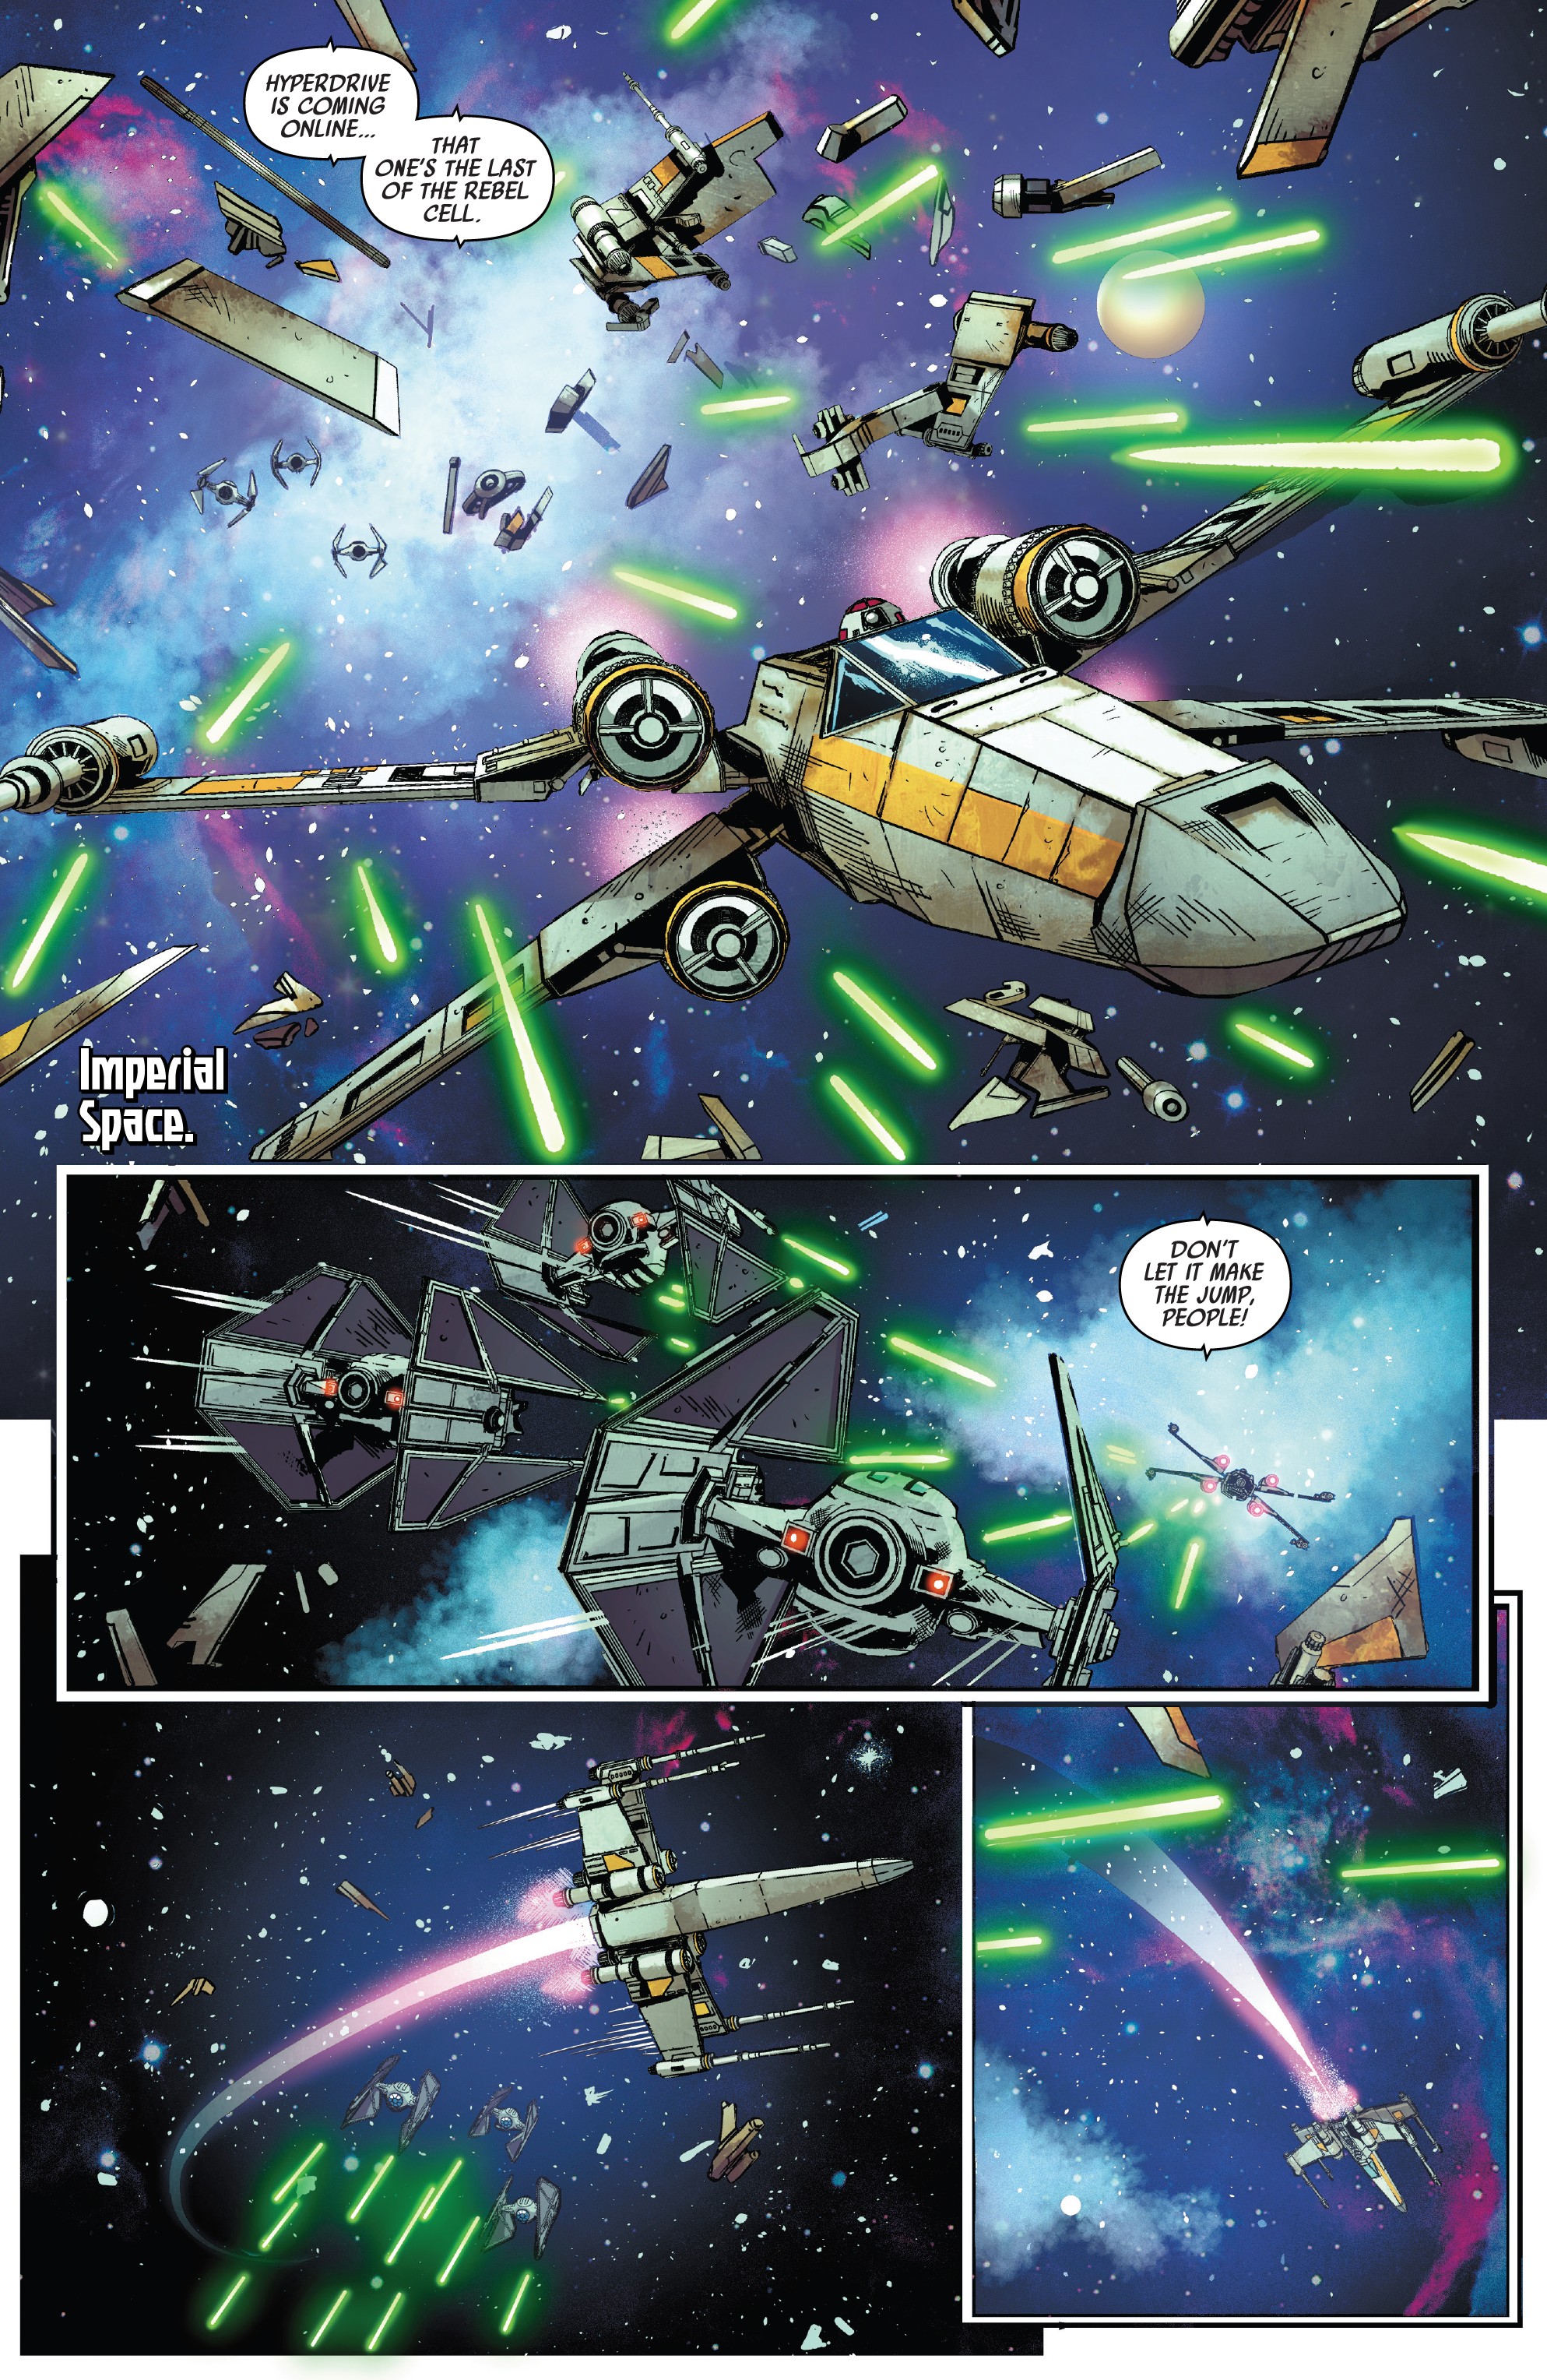 Star Wars: Tie Fighter (2019-): Chapter 1 - Page 2